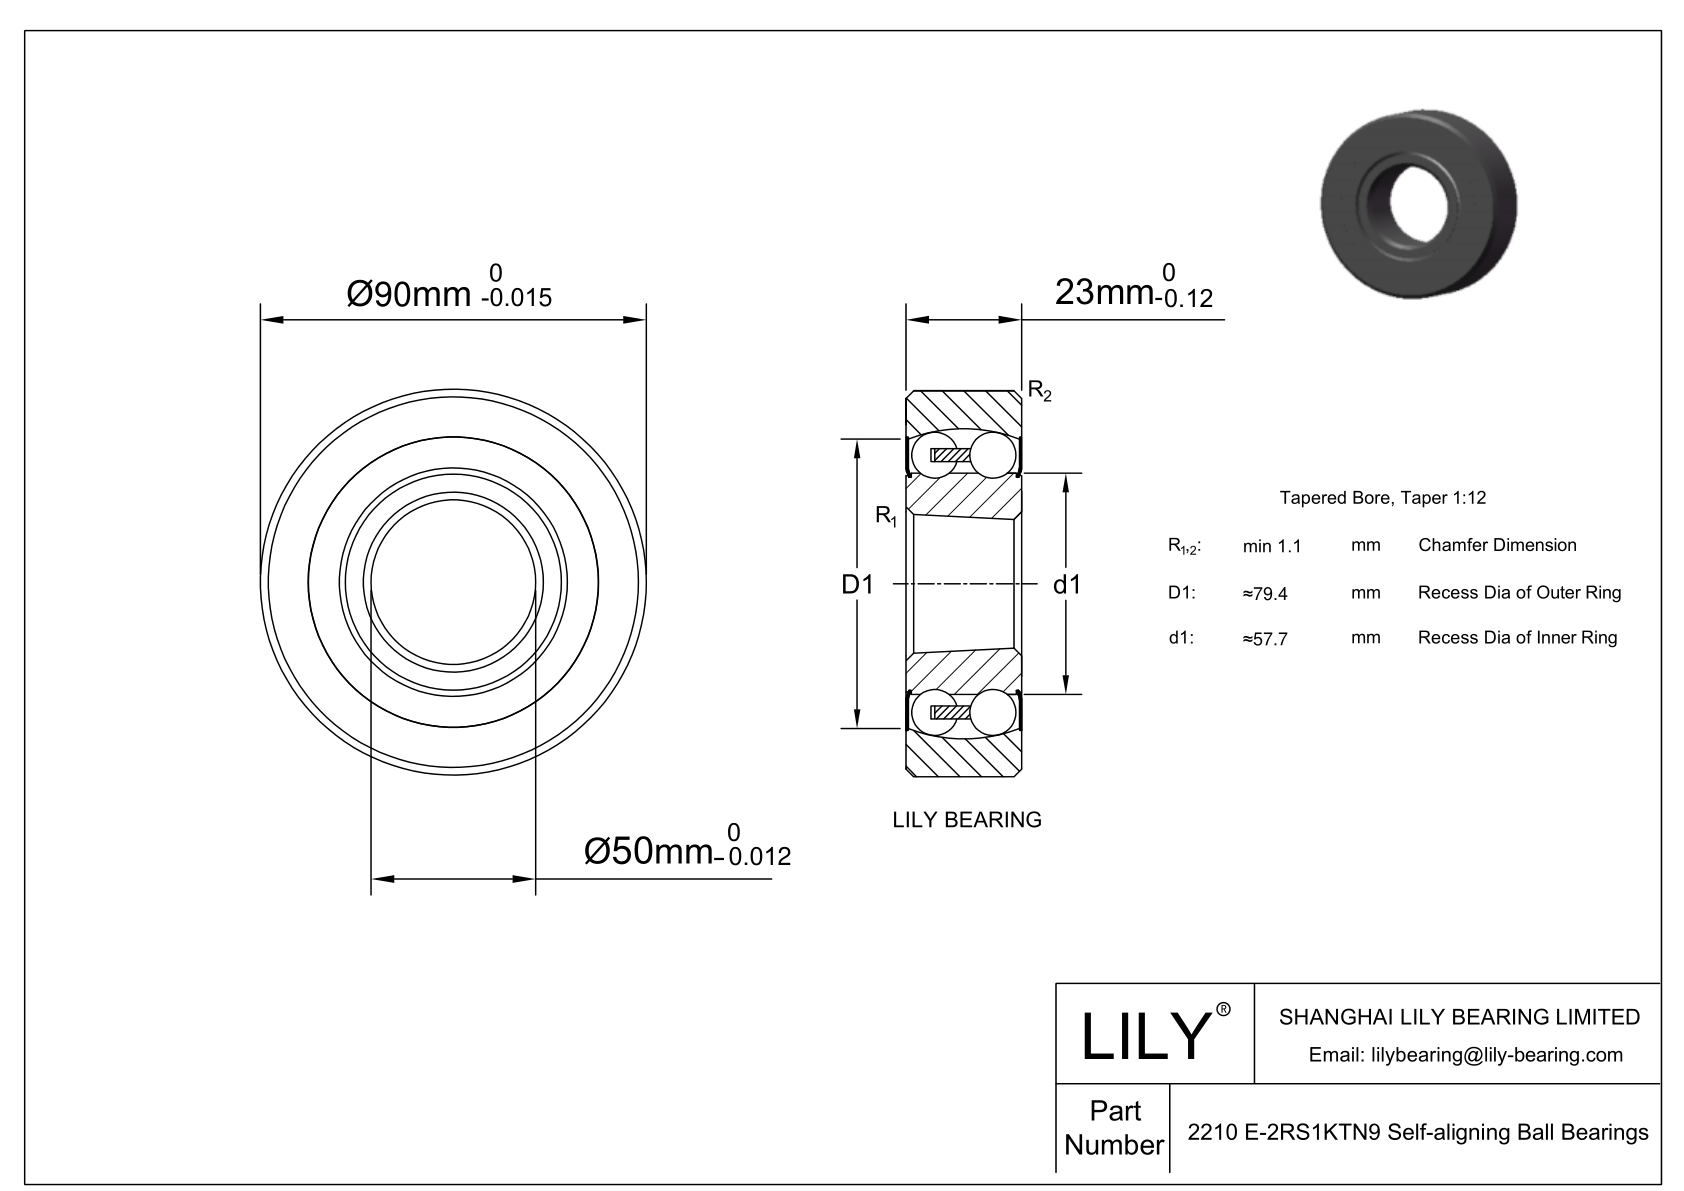 S2210 E-2RS1KTN9 Stainless Steel Self Aligning Ball Bearings cad drawing